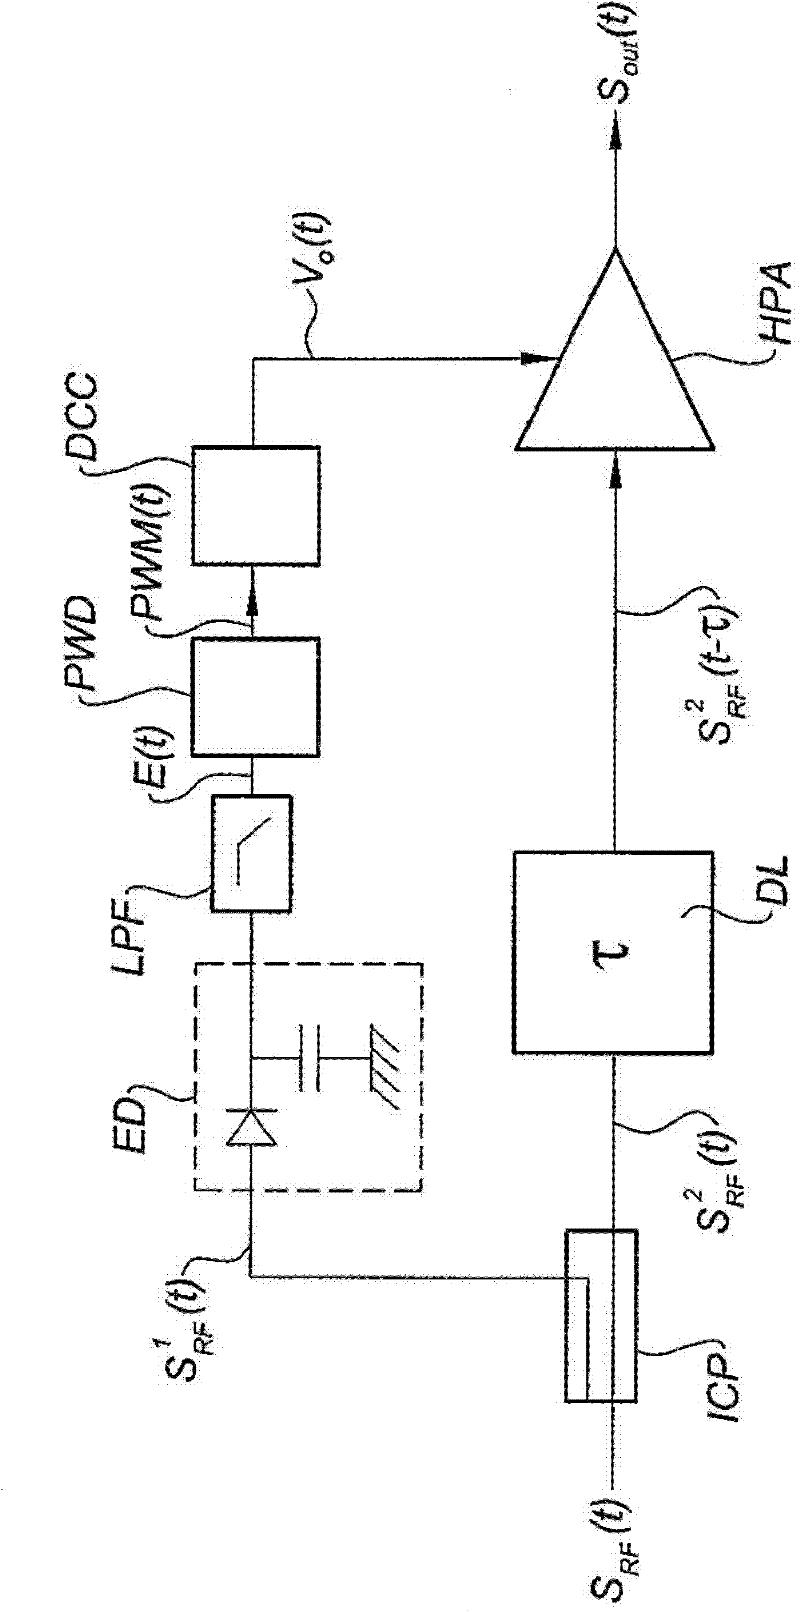 Radio-frequency power amplifier with fast envelope tracking